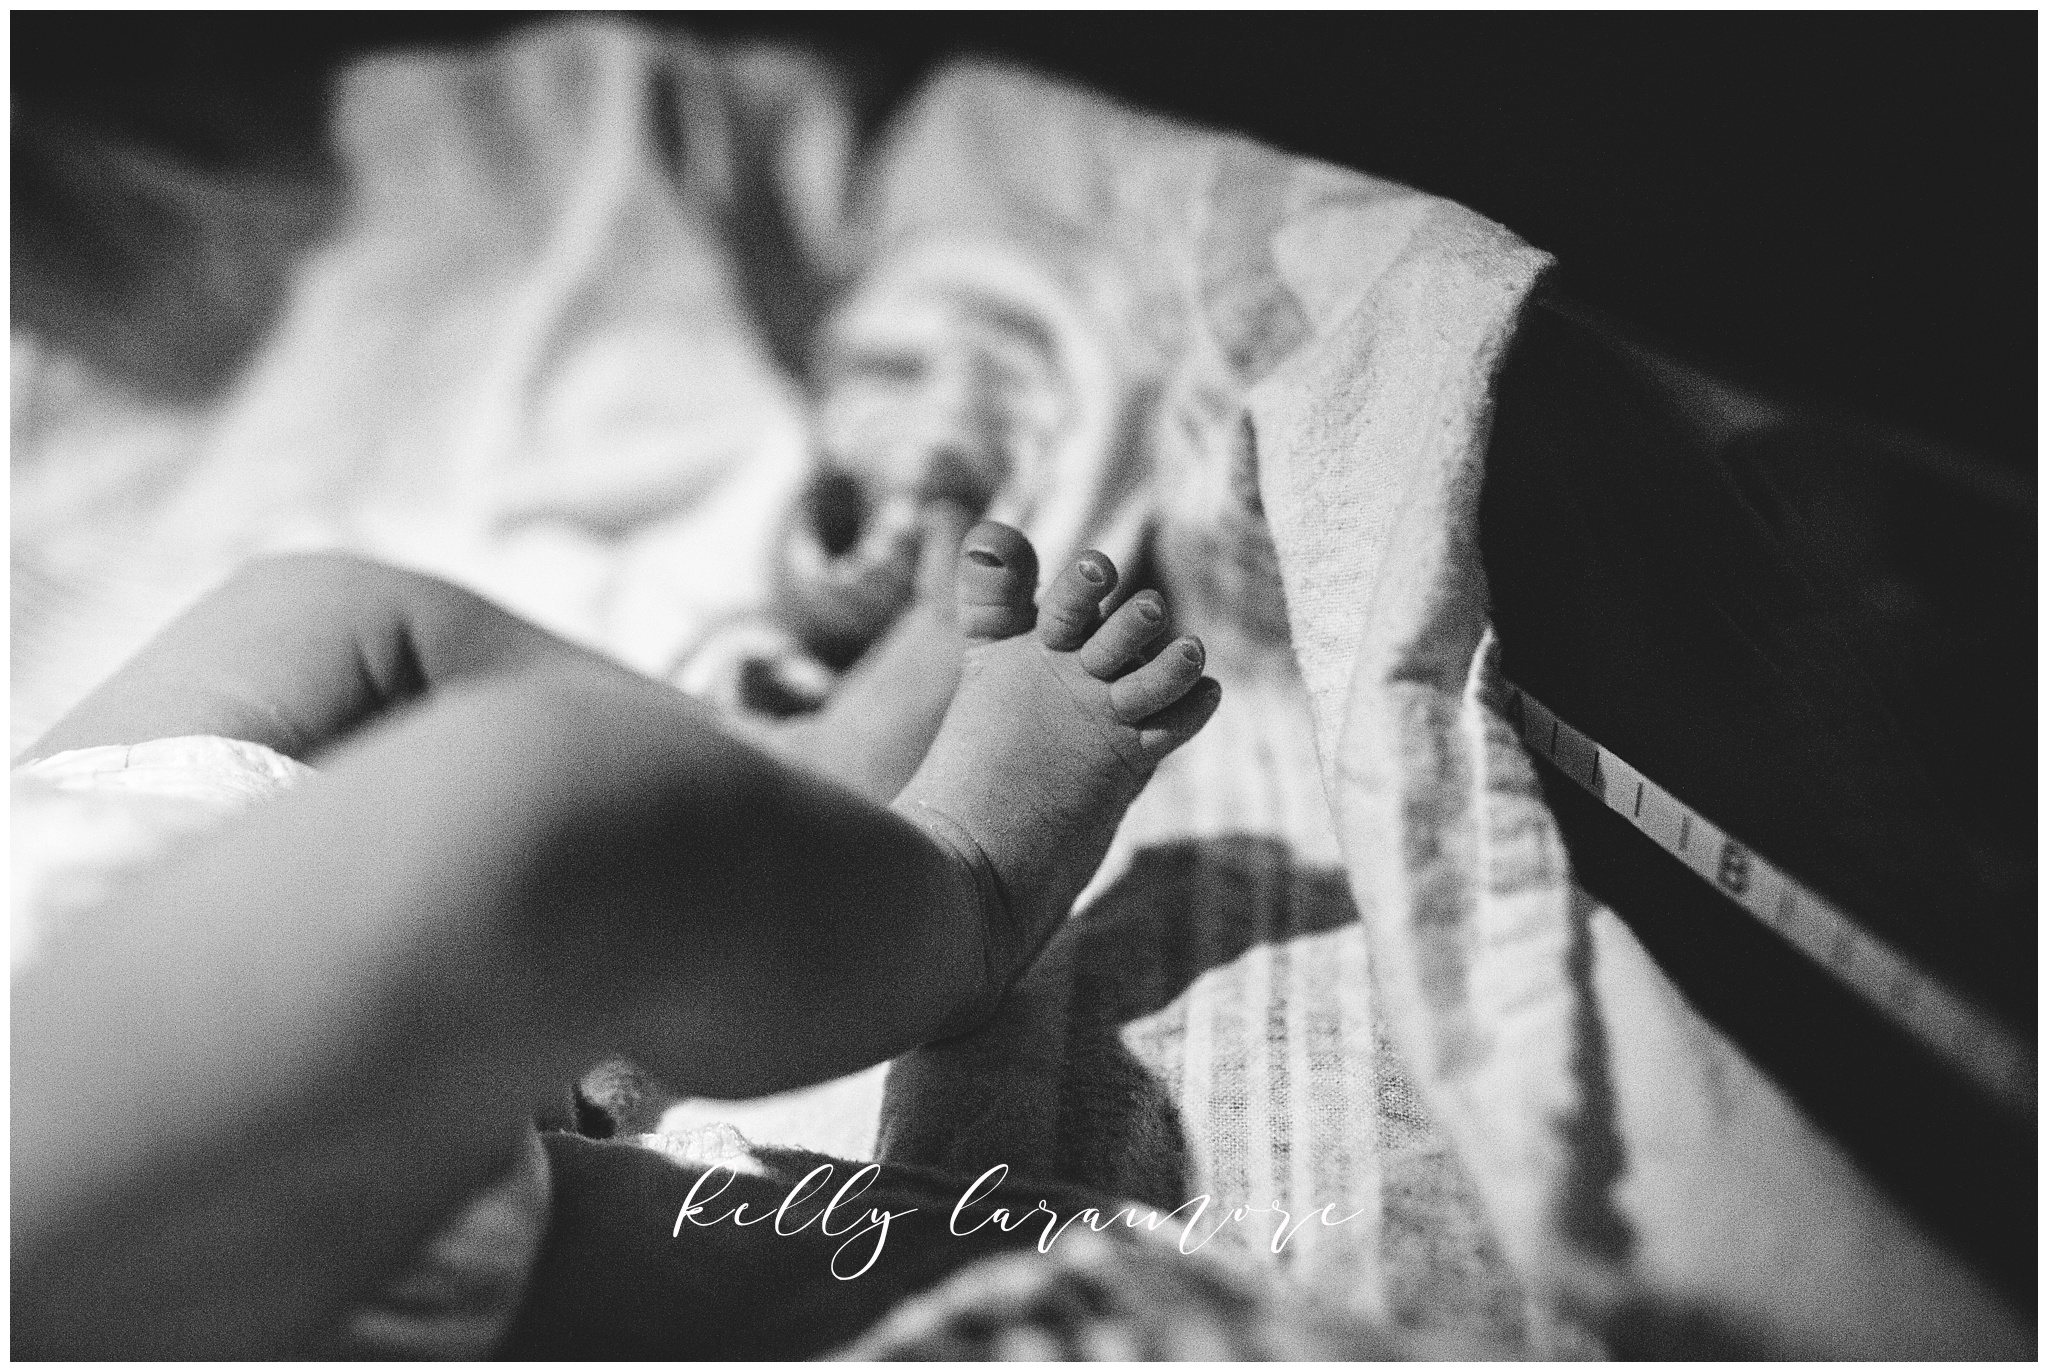 st louis birth story photographer, st louis family photographer, missouri baptist birth center birth, delivery room, baby toes